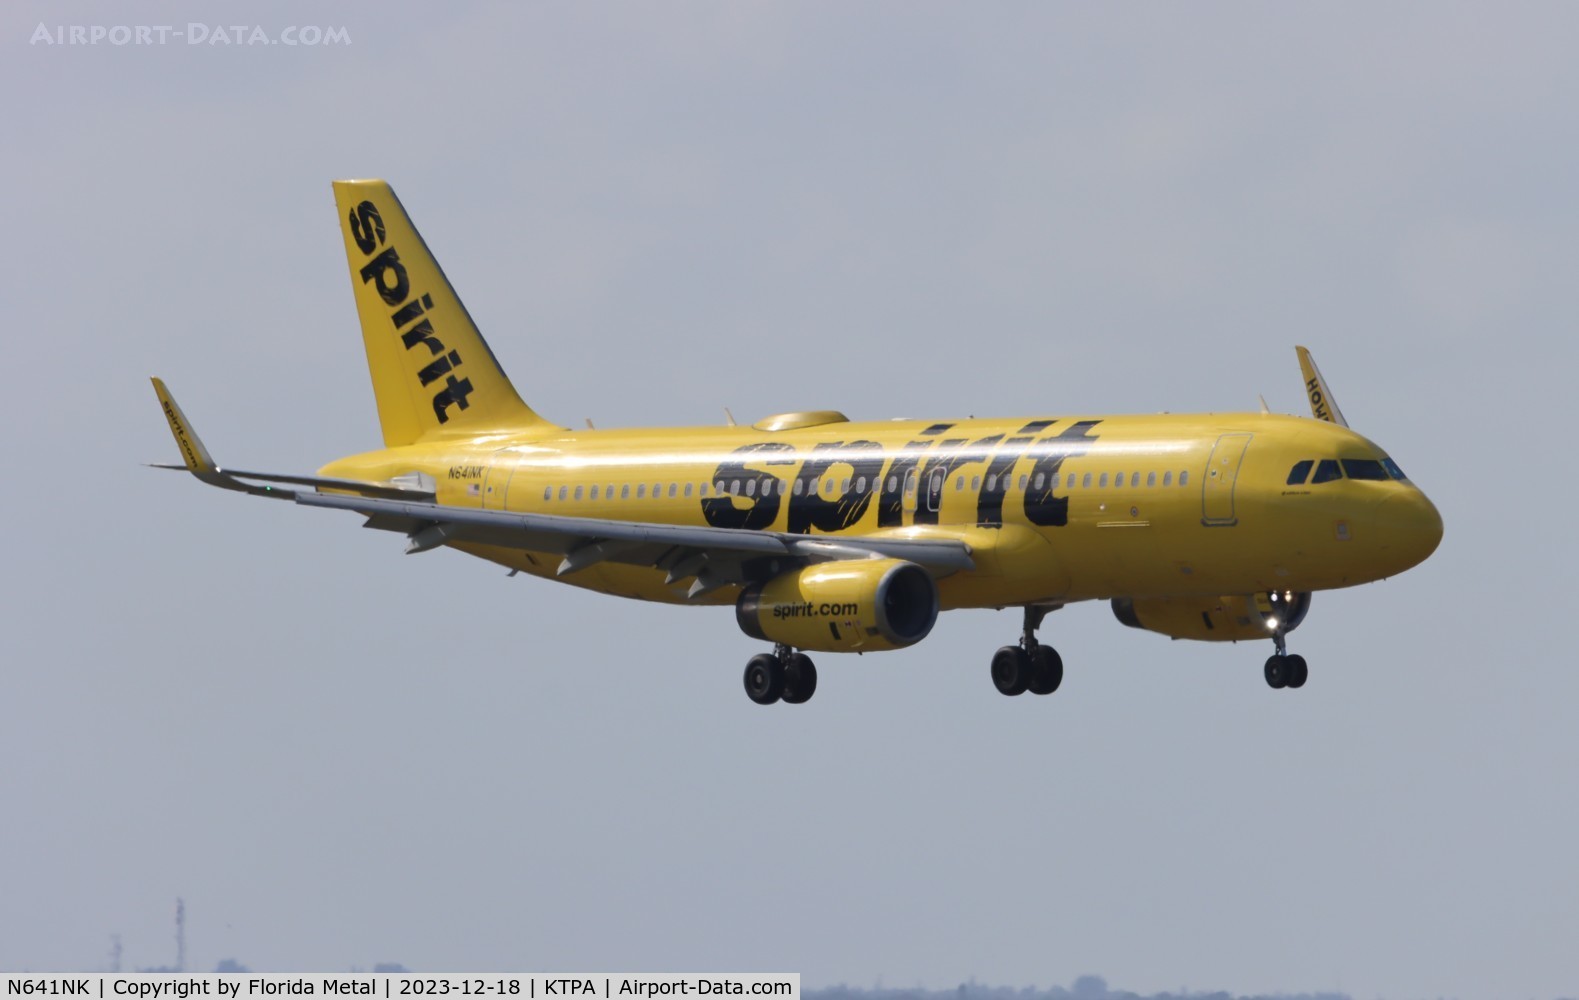 N641NK, 2015 Airbus A320-232 C/N 6566, NKS A320 yellow zx PIT-TPA